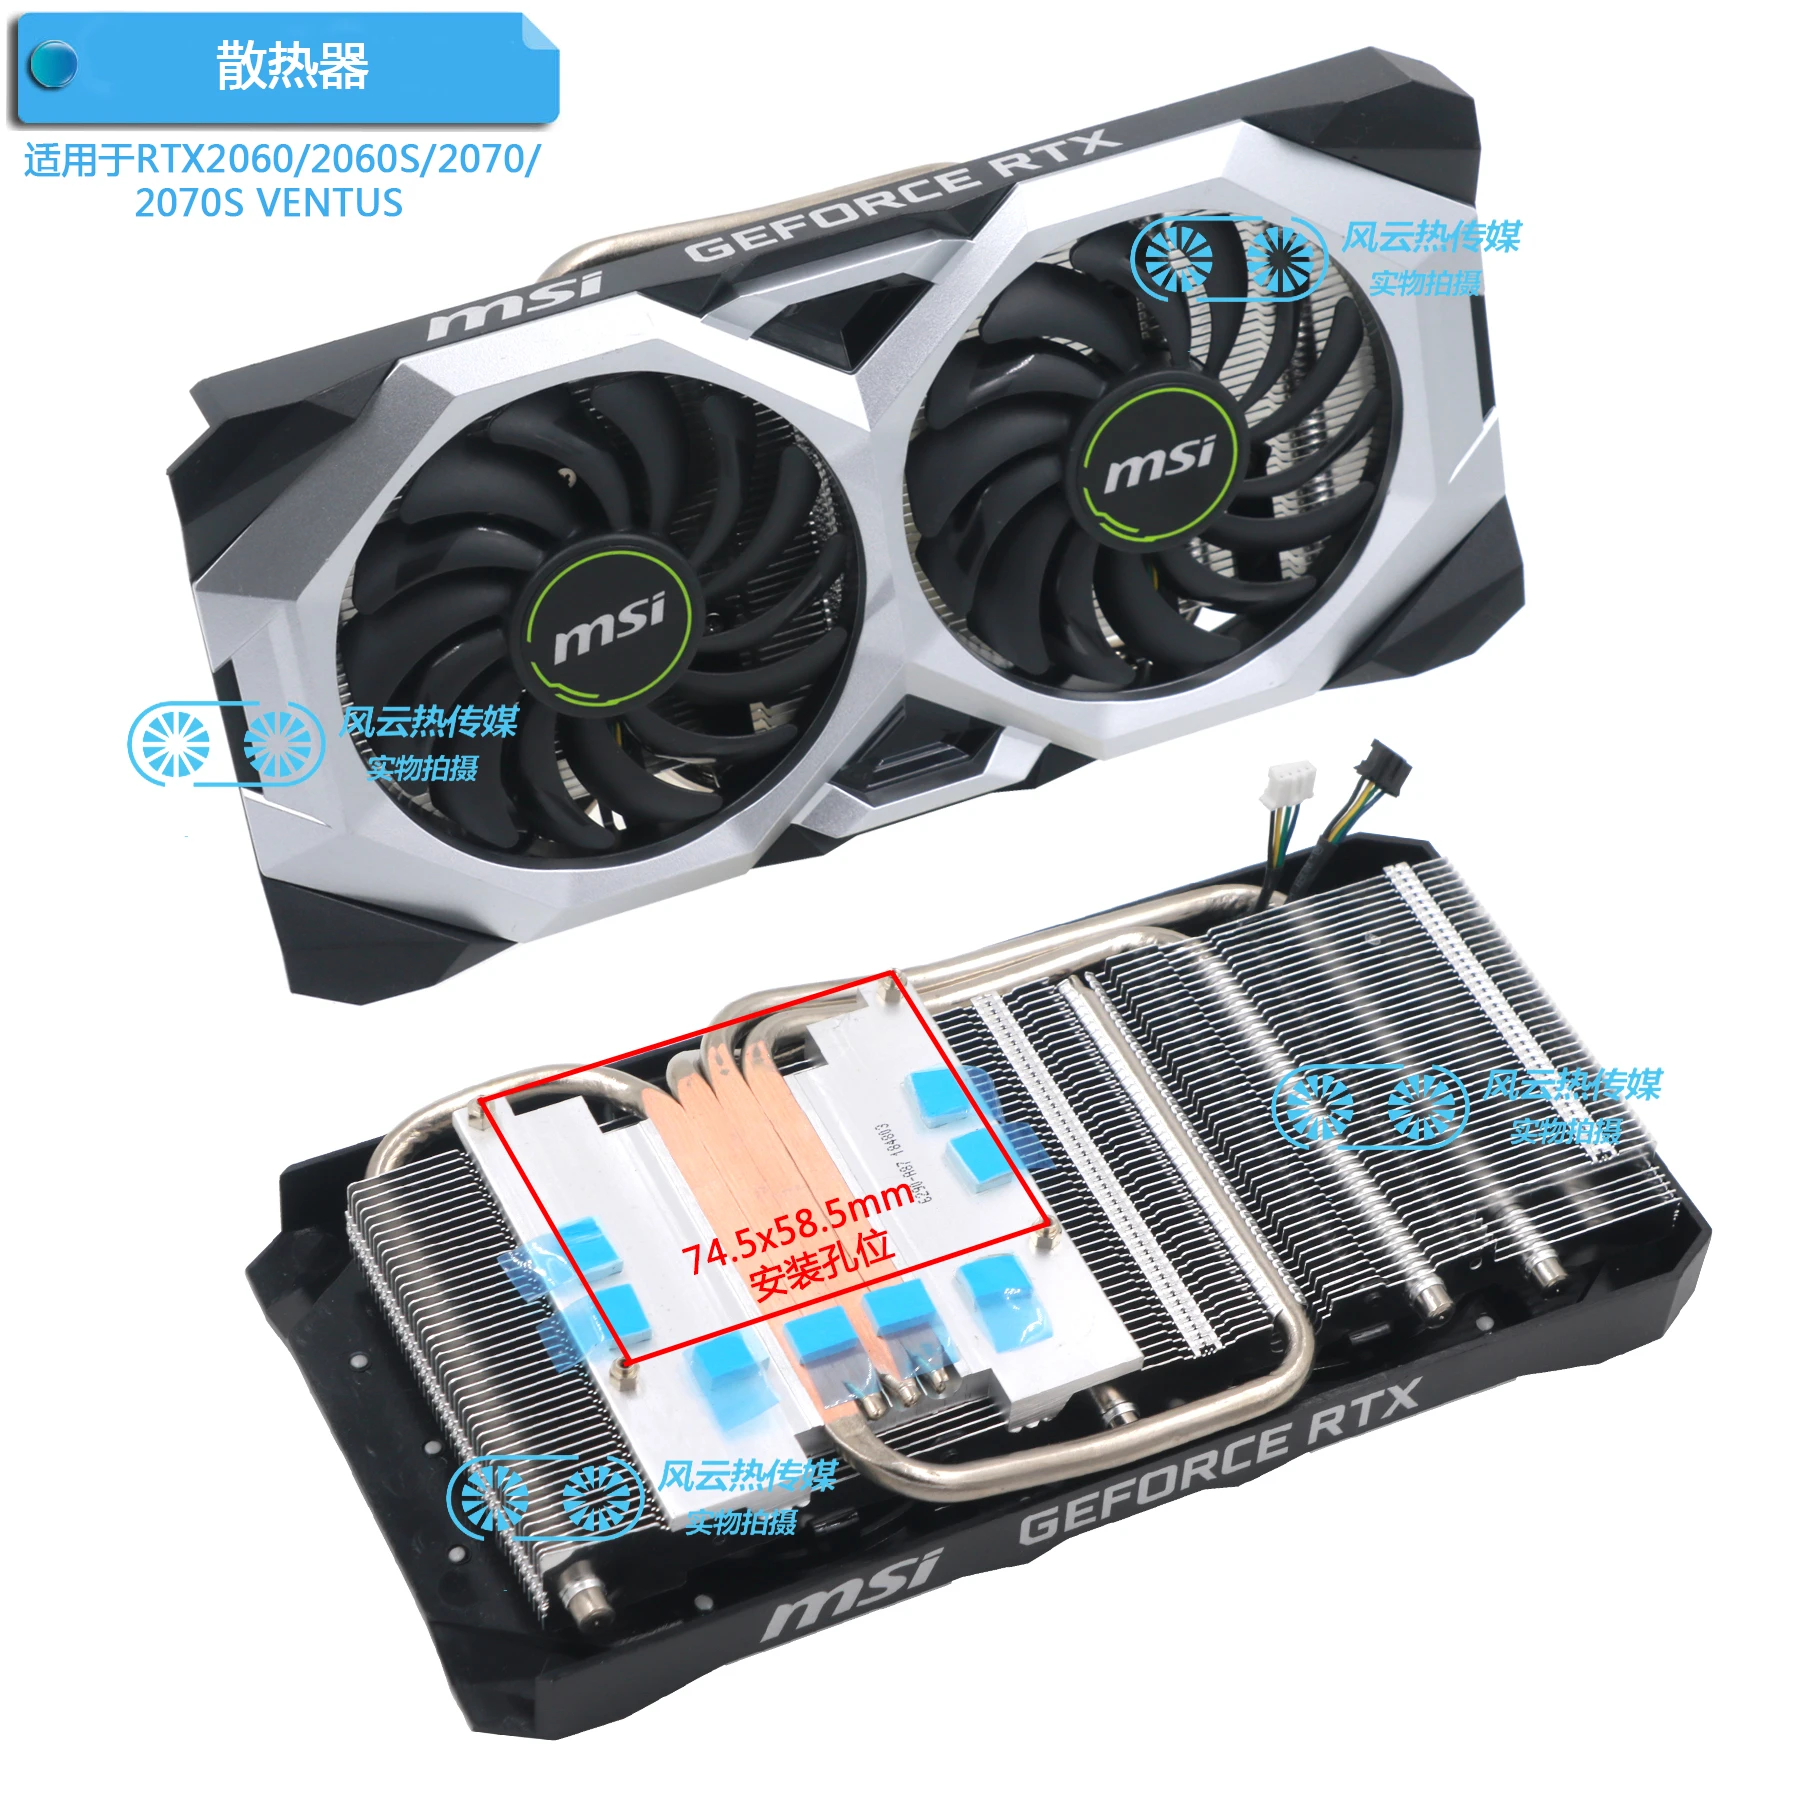 New Original Graphics Video Card Cooler For Msi Rtx2080 Xs Rtx2070